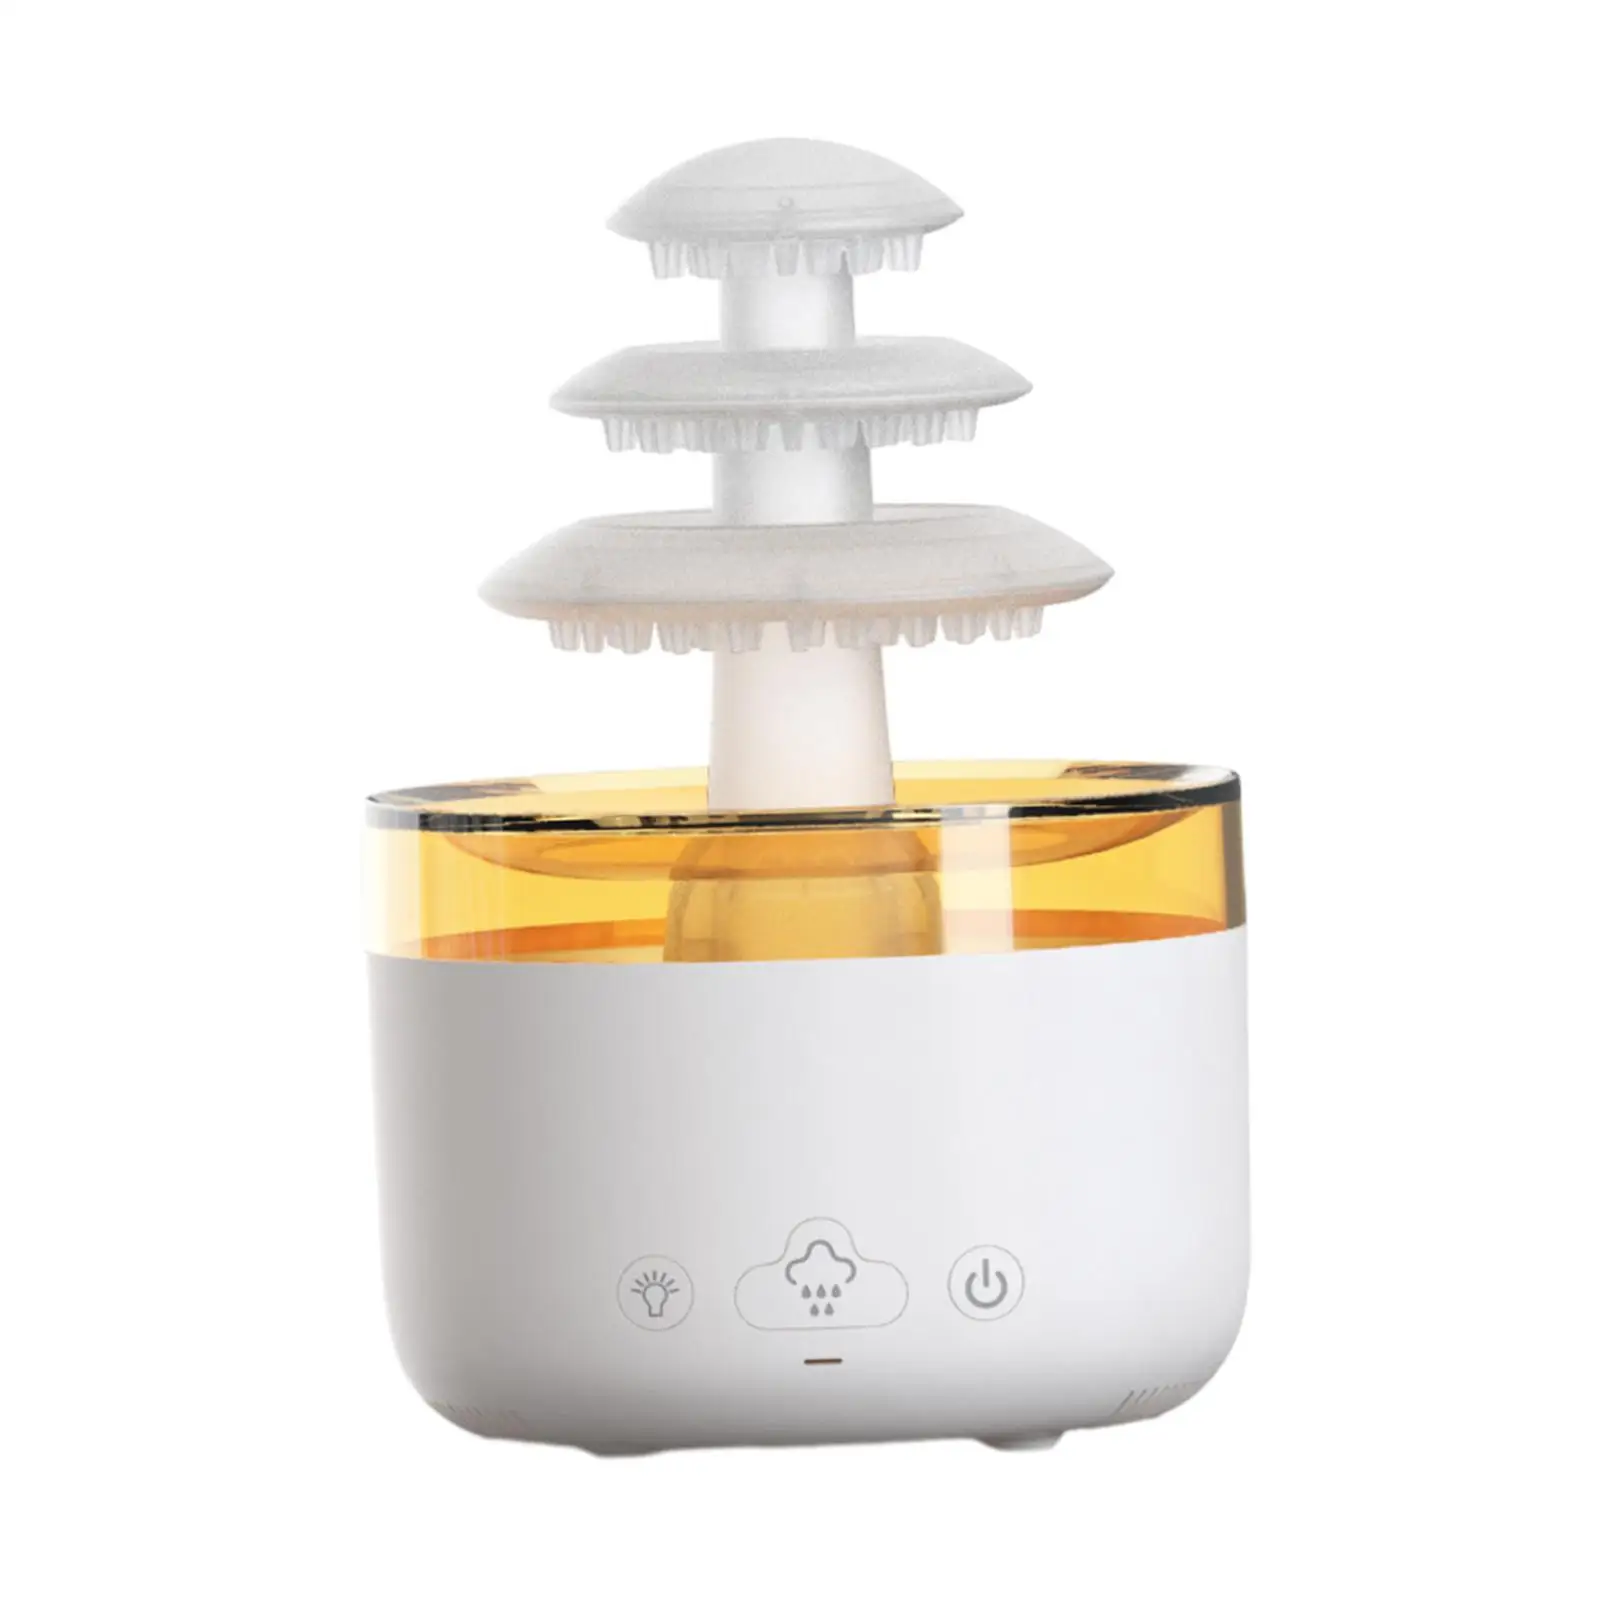 Essential Oil Diffuser Premium 500ml 7 Colors Lights Changing Mist Diffuser for